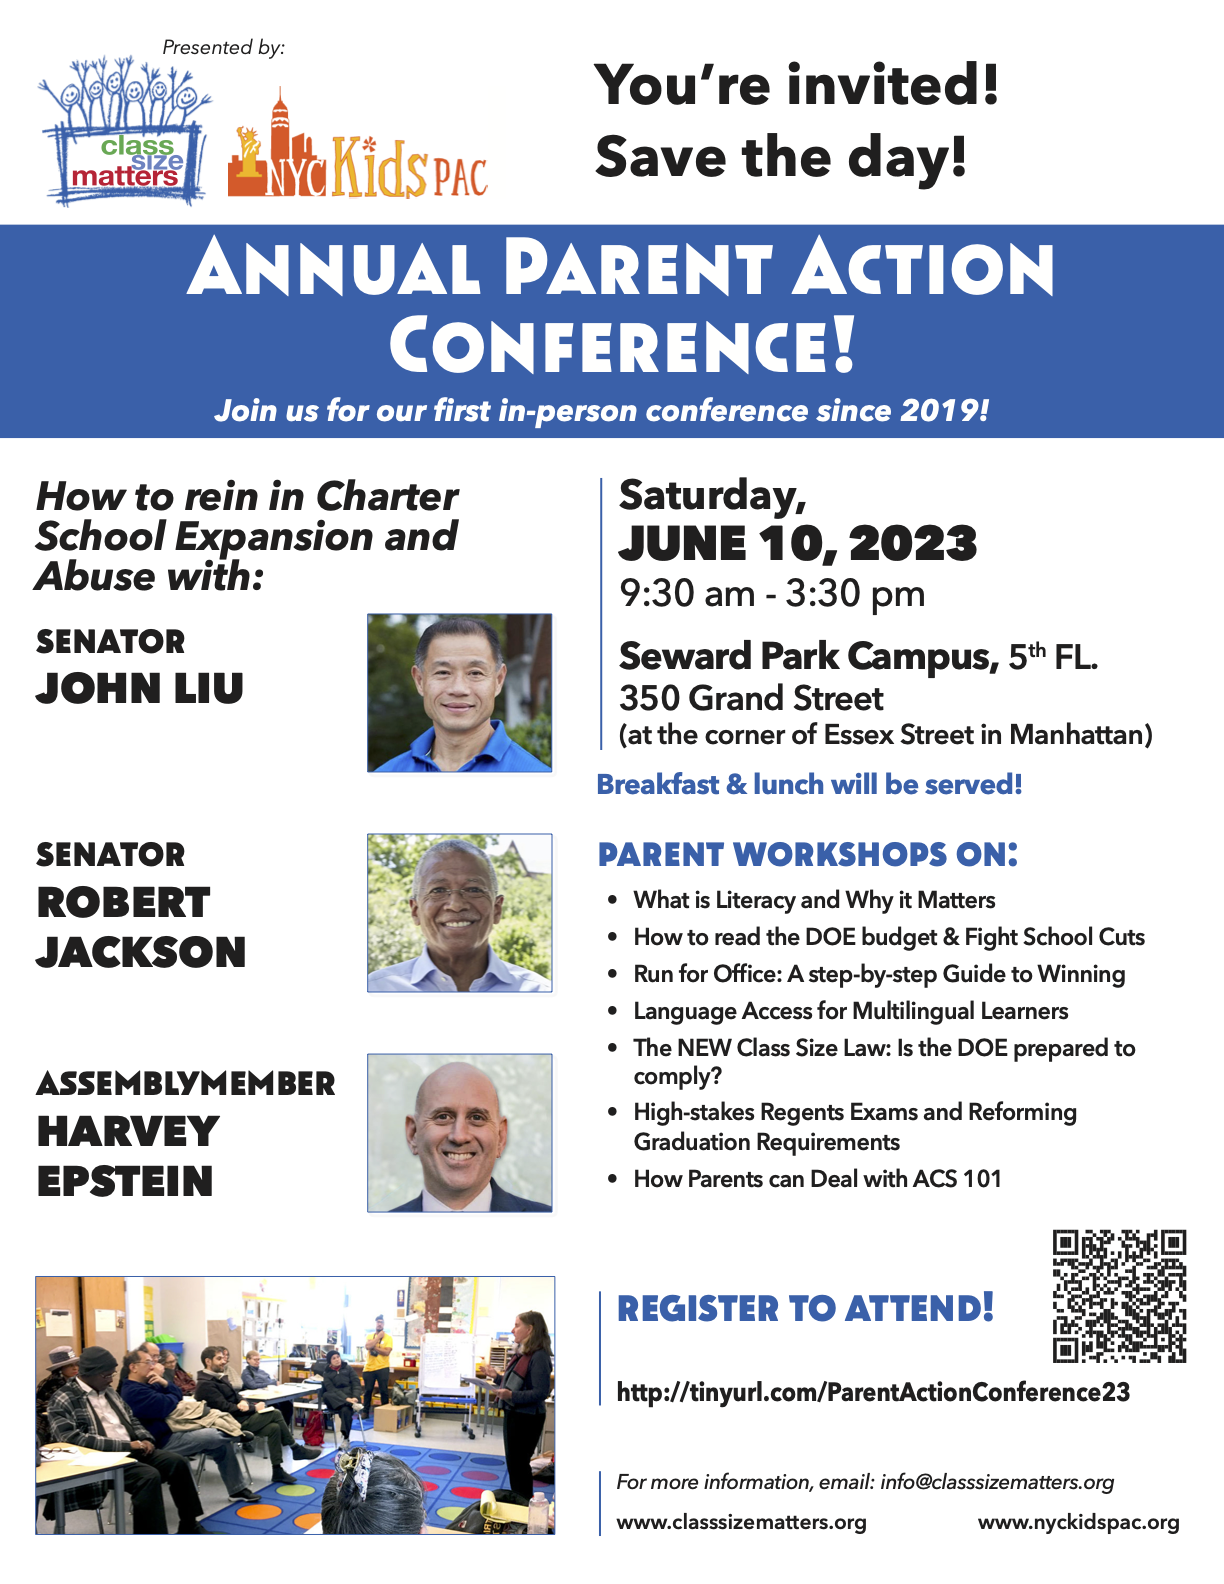 Join us for our Parent Action Conference June 10!